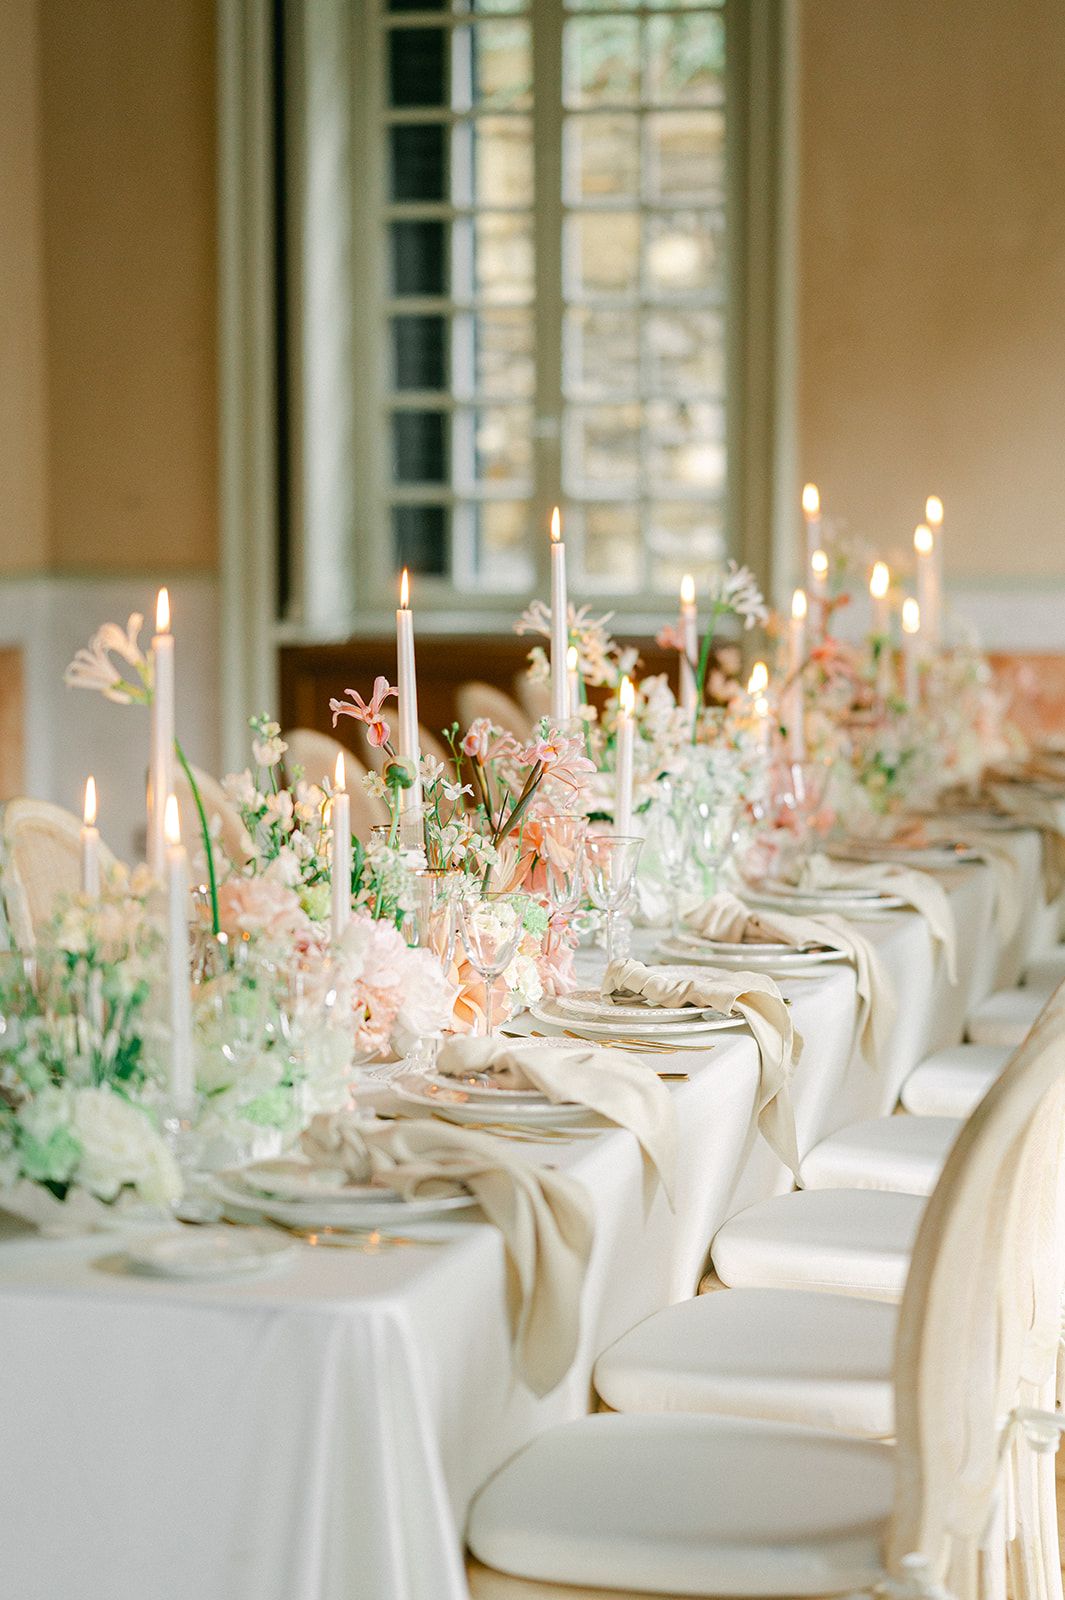 Modern and stylish wedding tablescape with candles, linens and greenery.